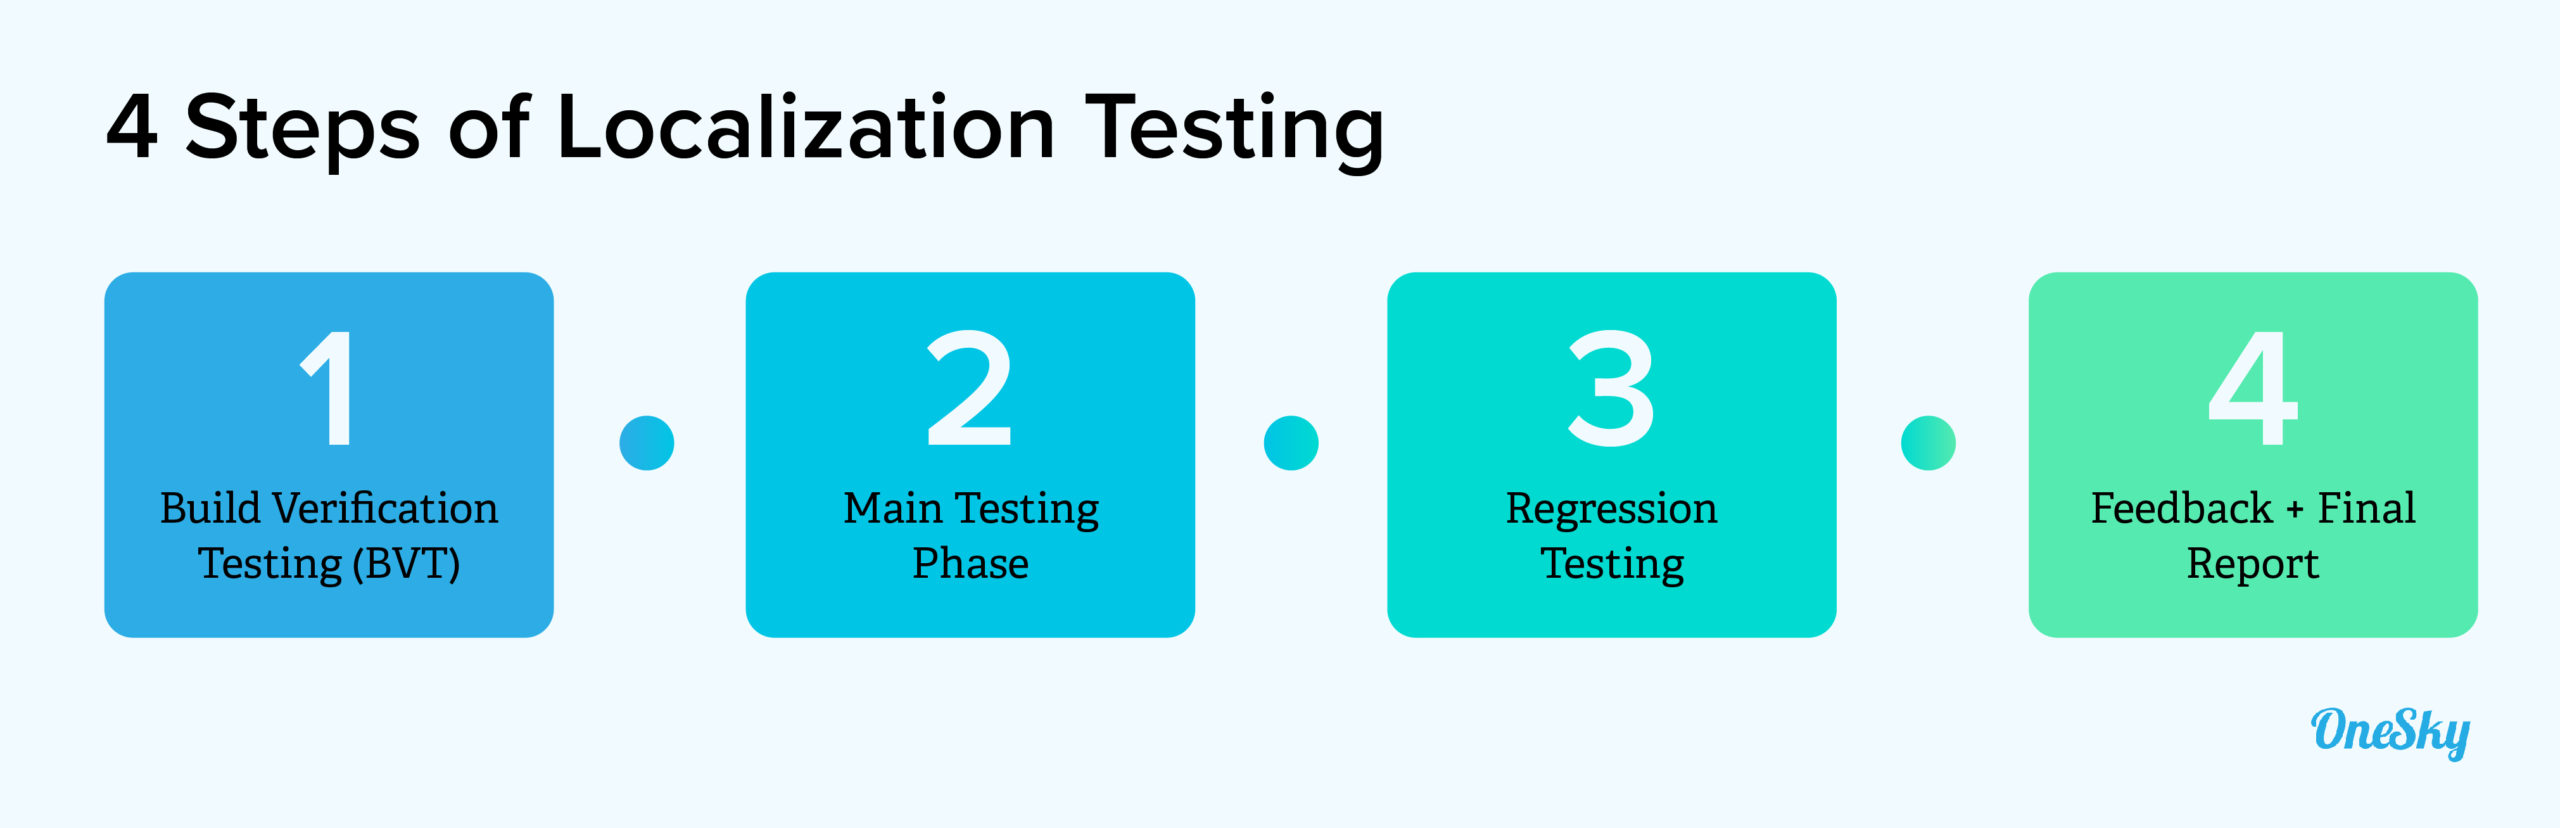 steps of localization testing